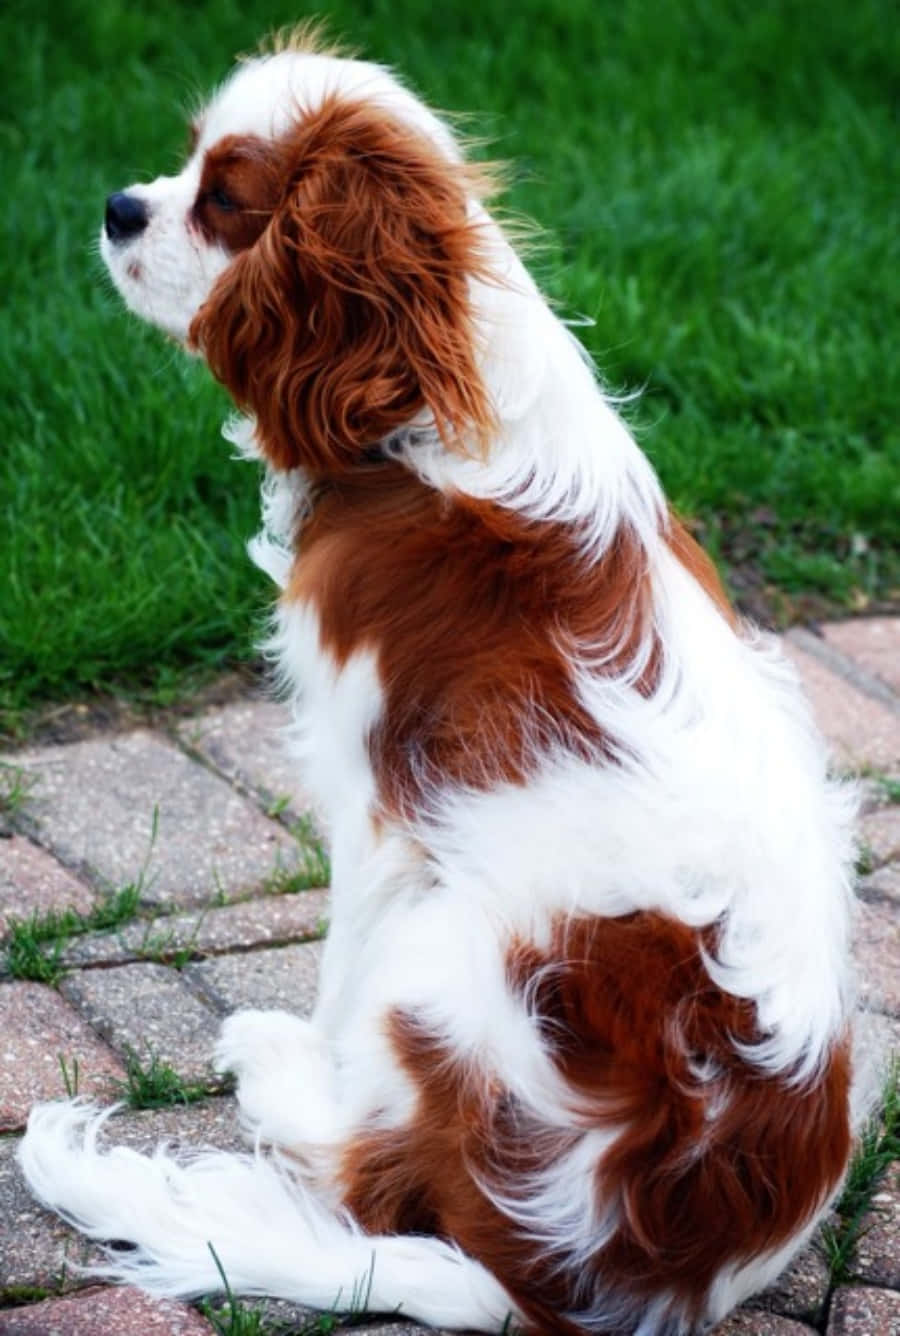 Immaginedel Cane Cavalier King Charles Spaniel